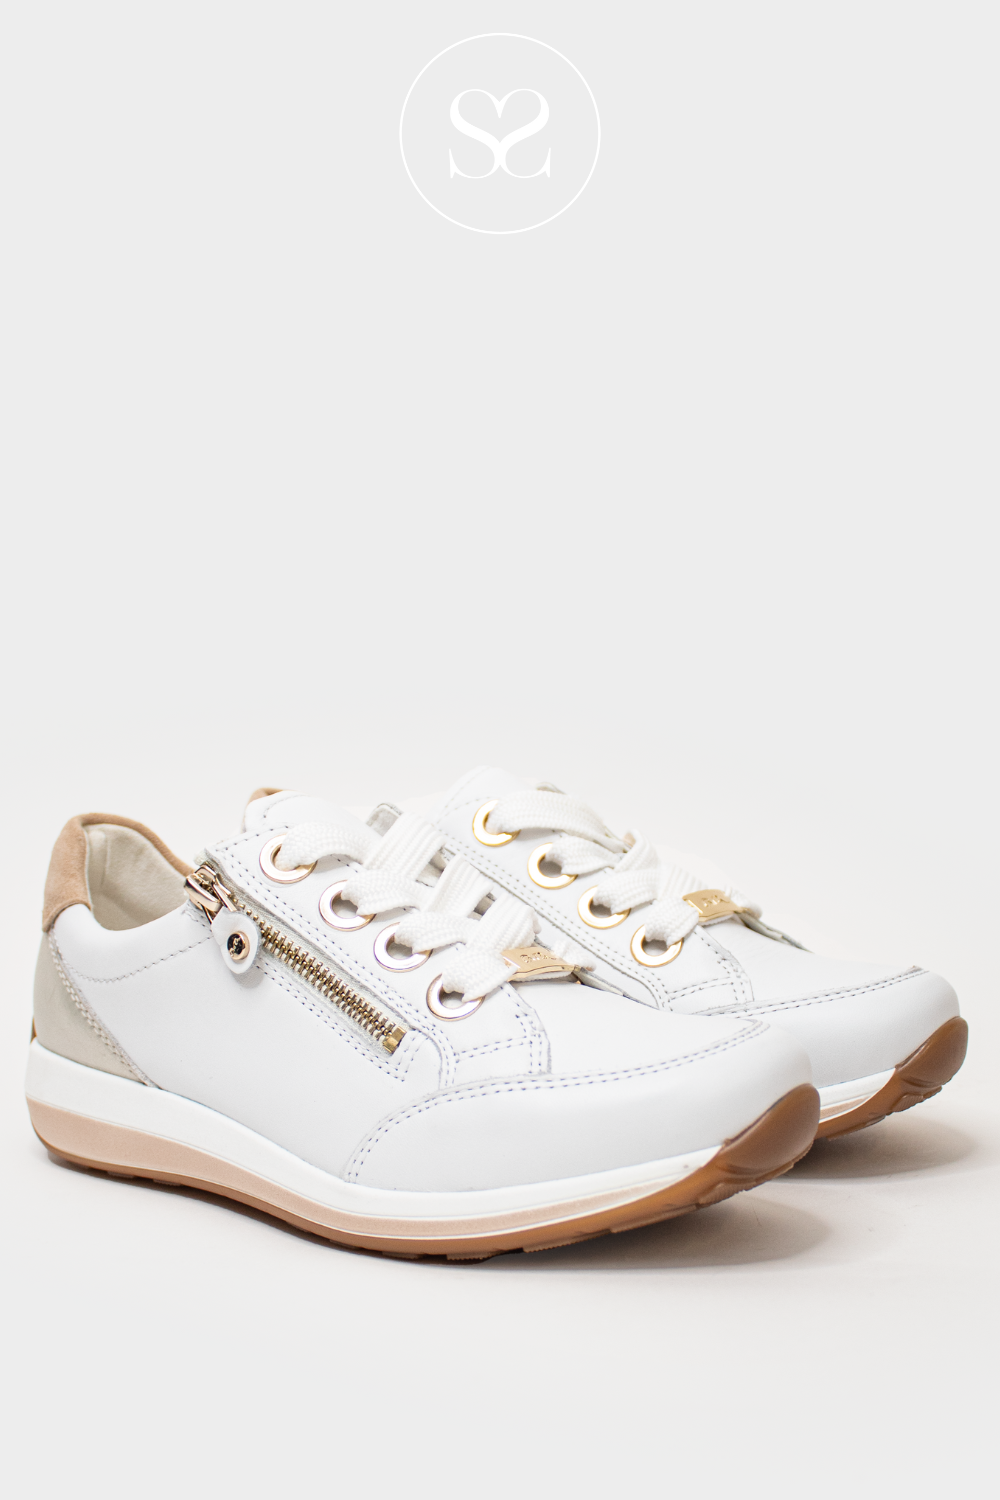 ARA 12_34587_79 WHITE LEATHER TRAINERS WITH SILVER HEEL, LACES AND SIDE ZIP